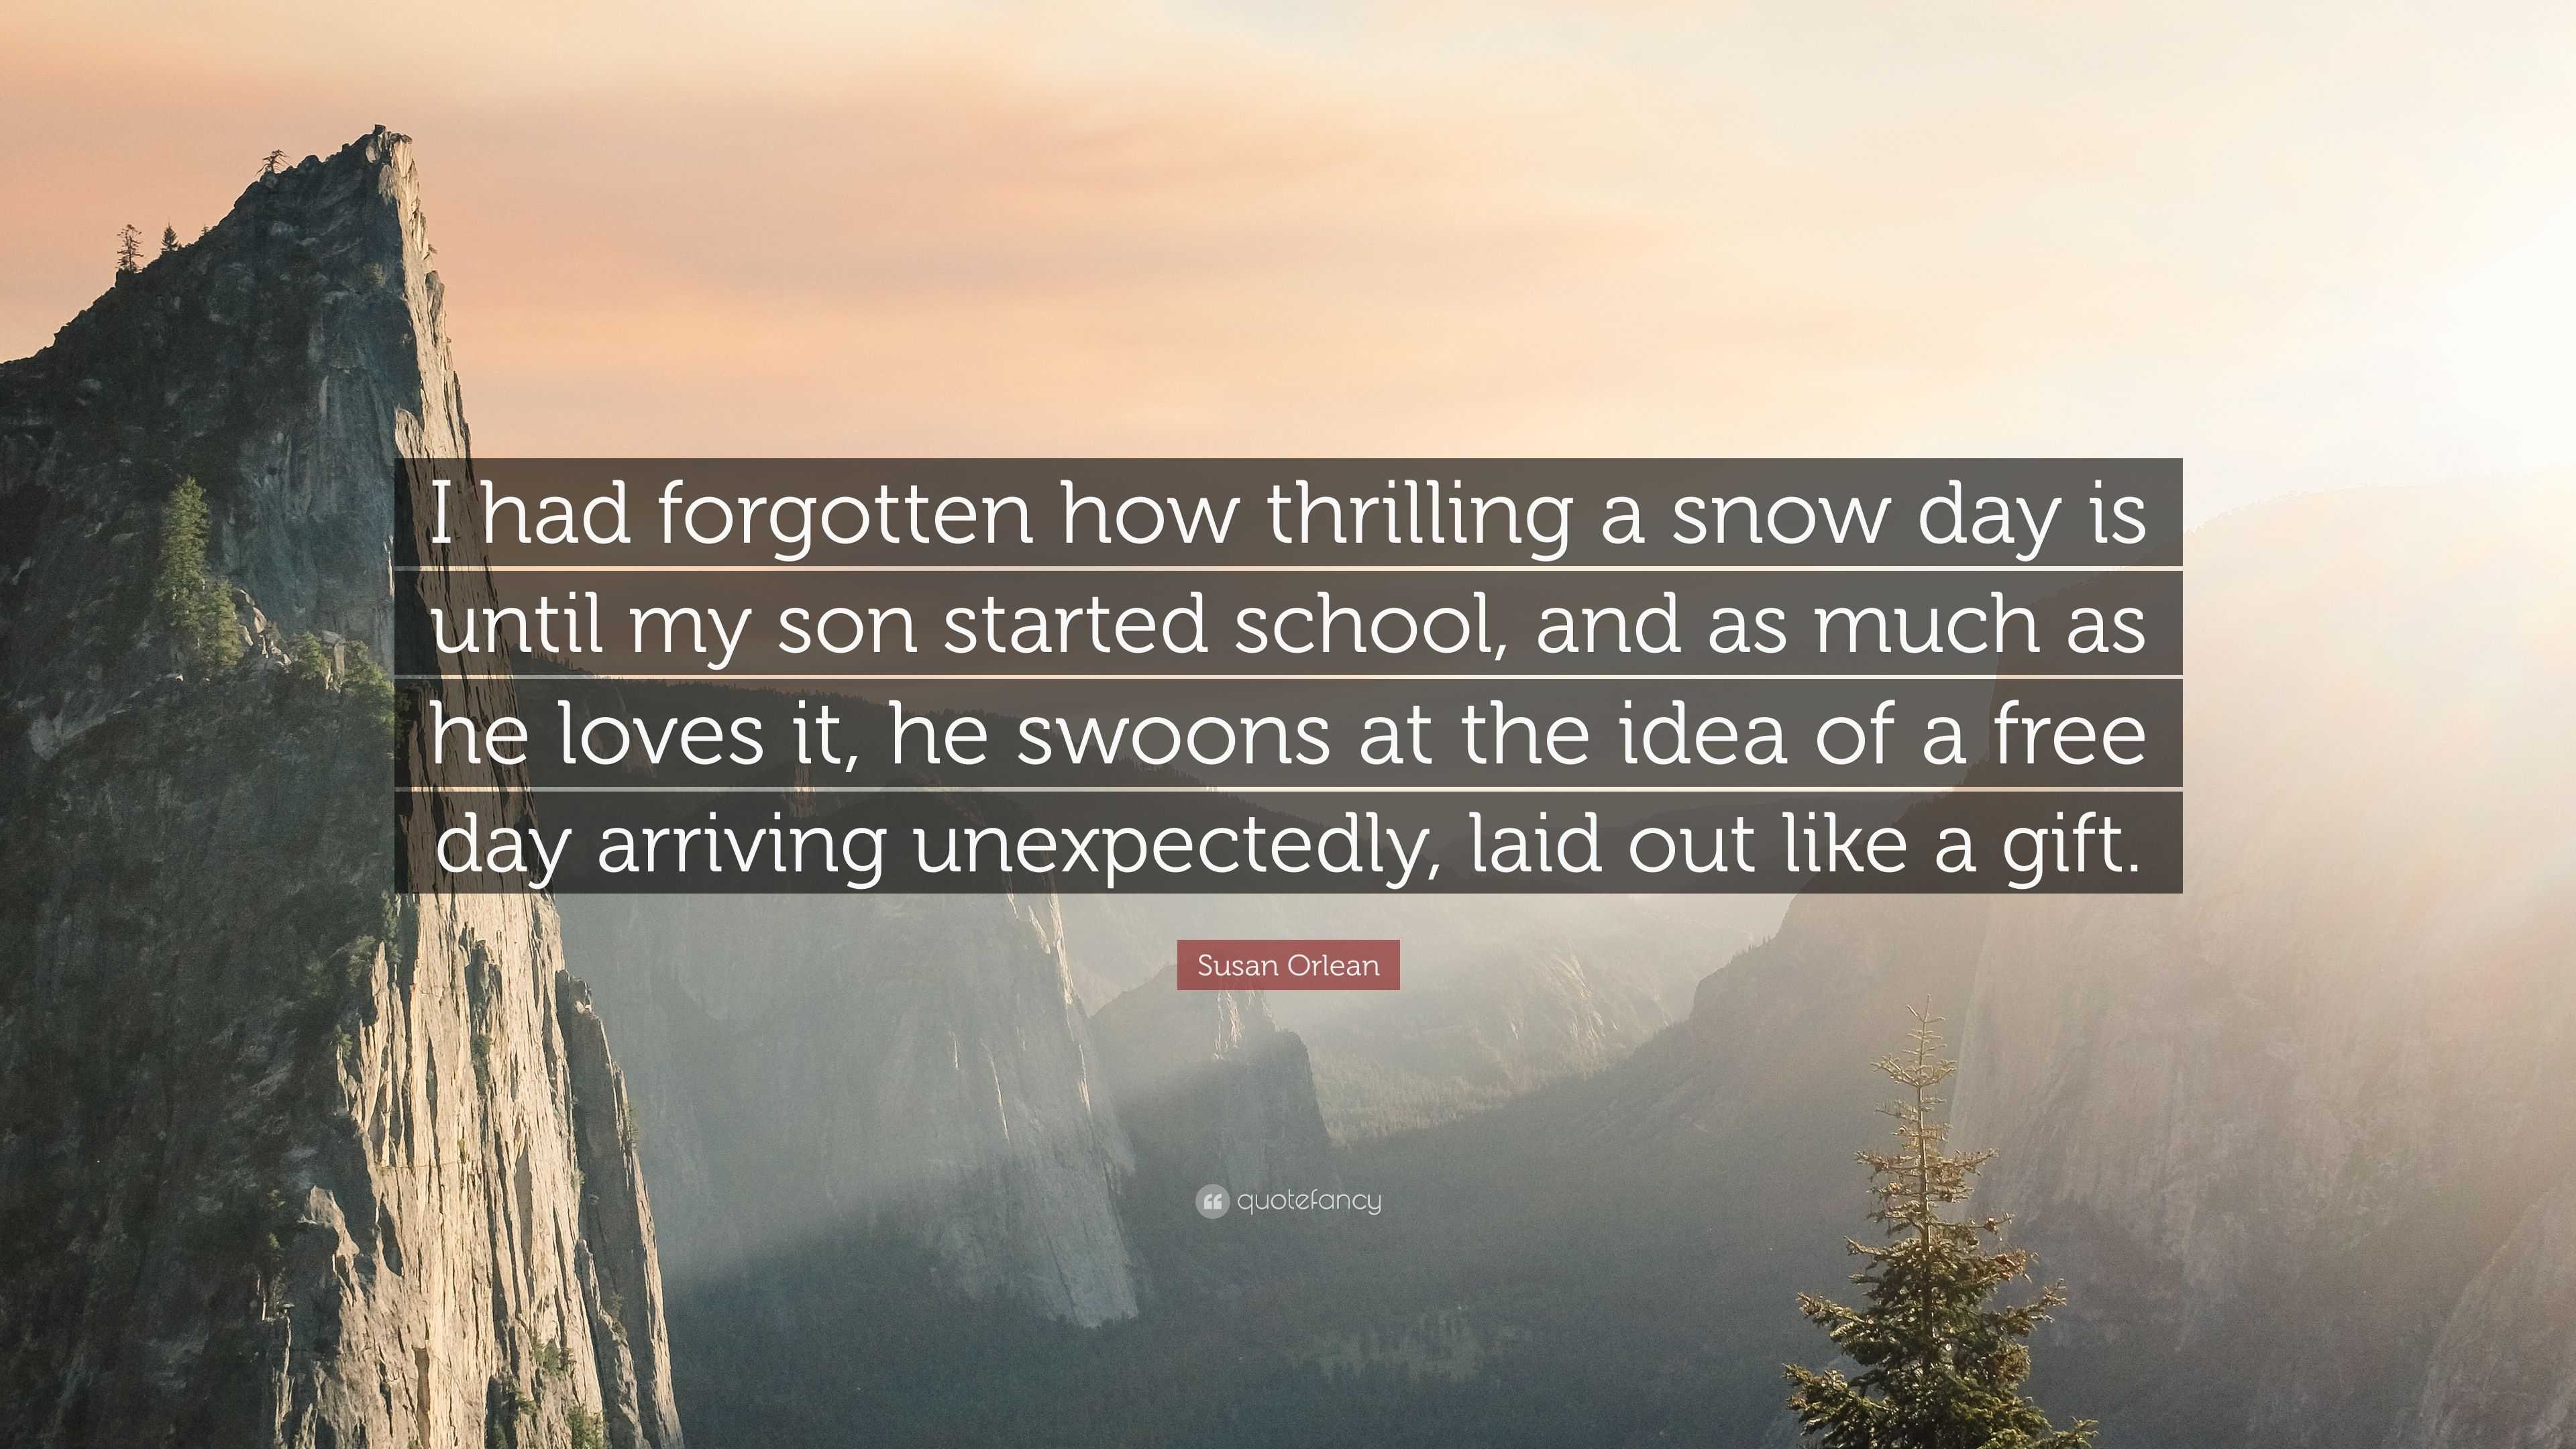 Susan Orlean Quote “I had forgotten how thrilling a snow day is until my